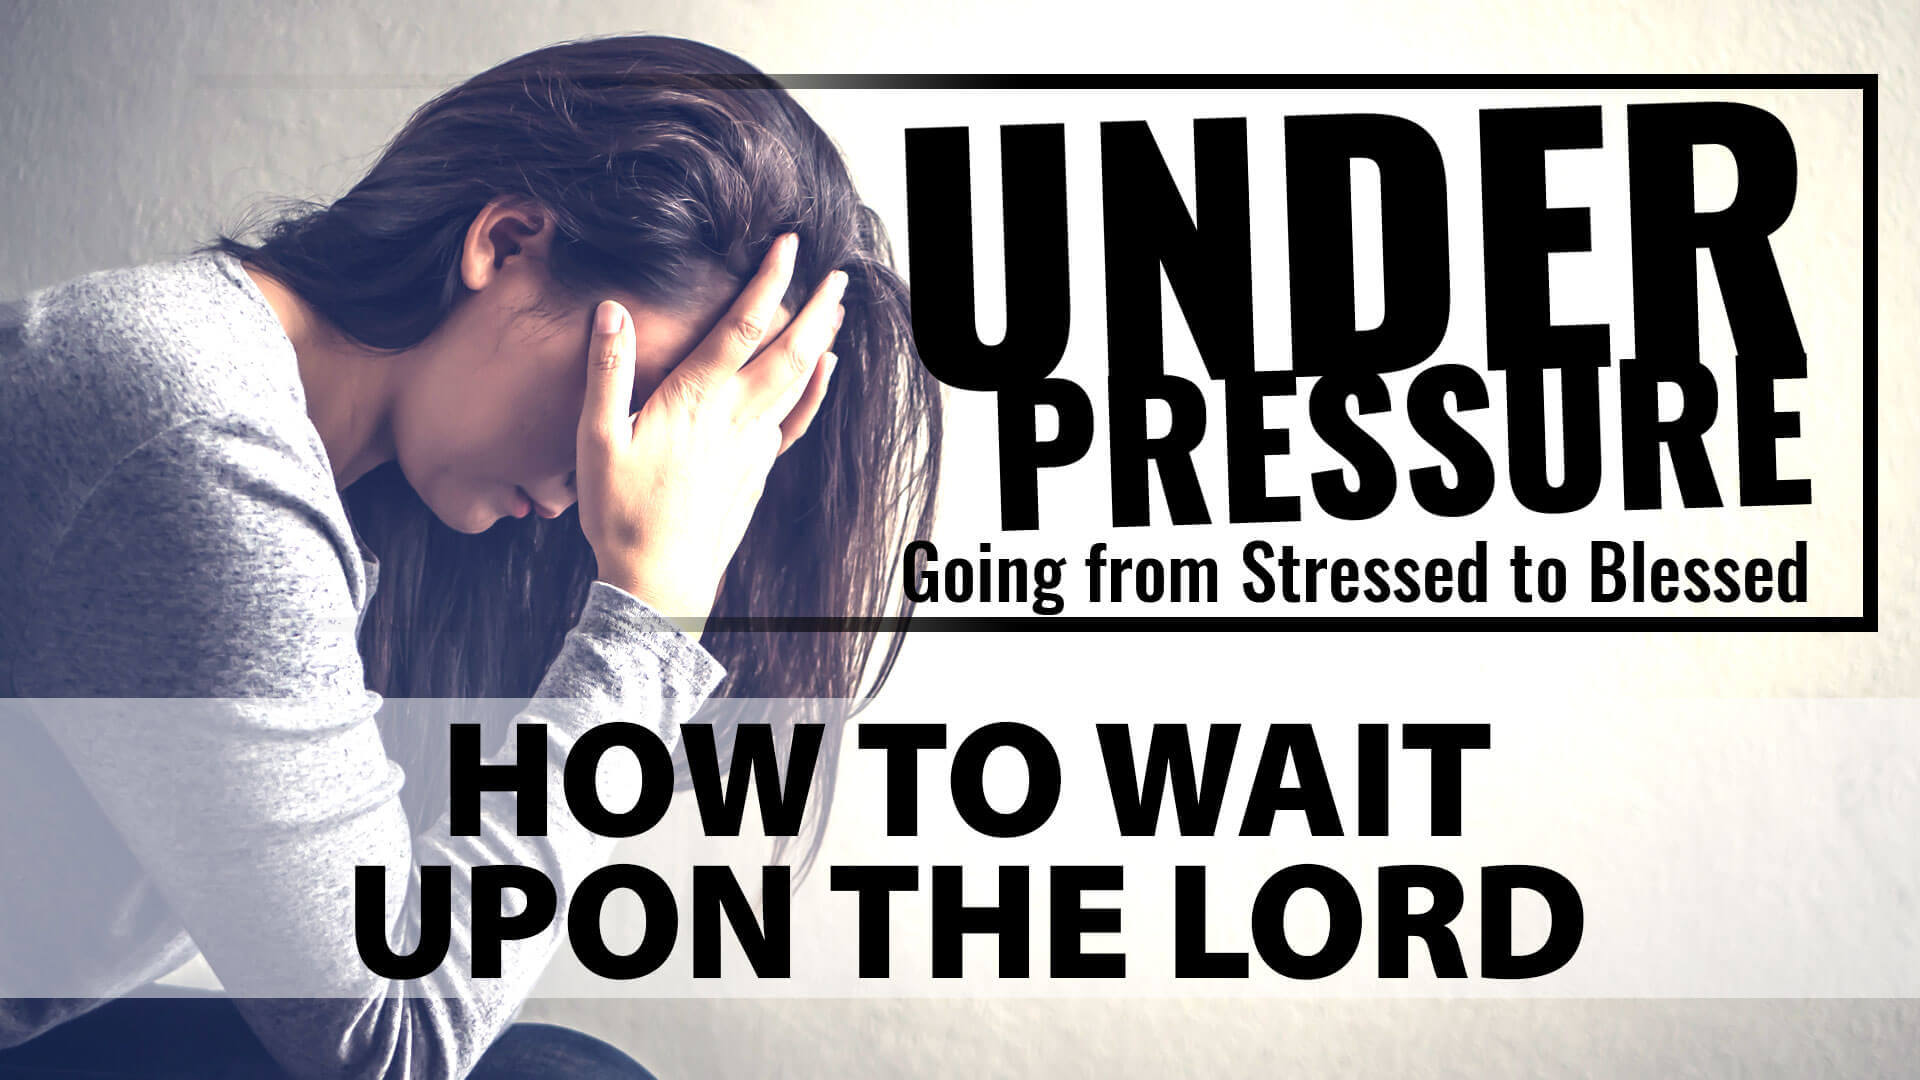 Under Presser: How to Wait Upon the Lord